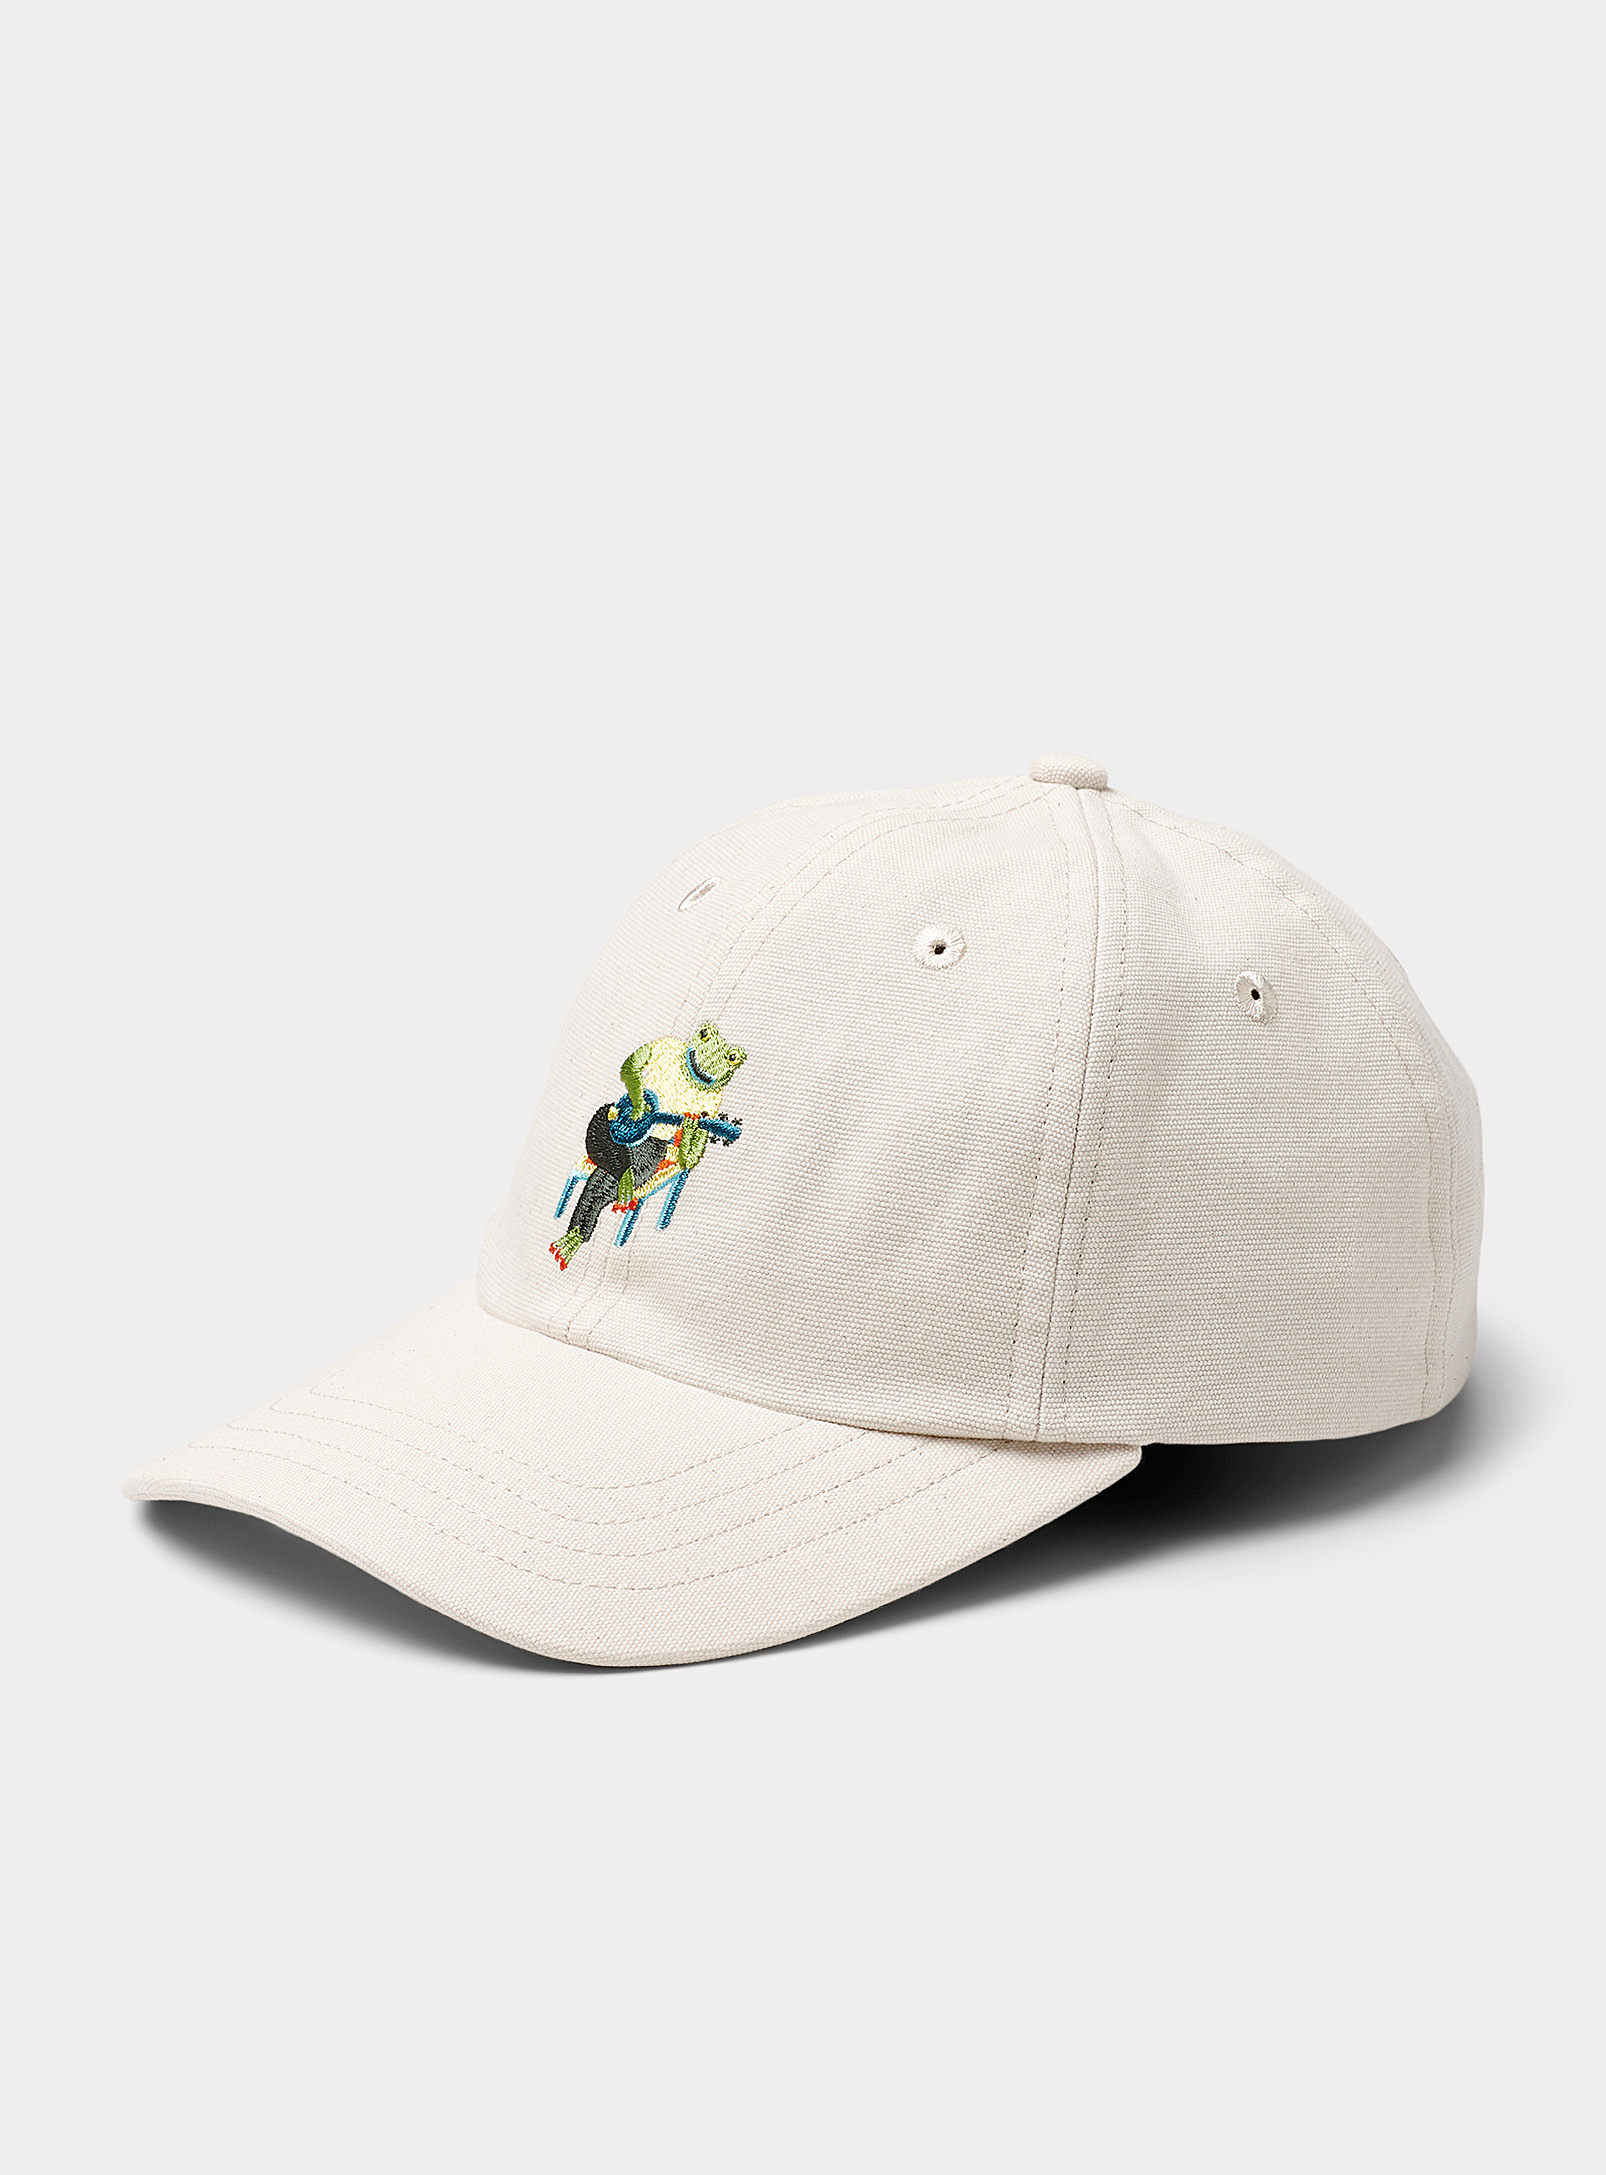 Olow Musician Frog Embroidery Cap In Neutral